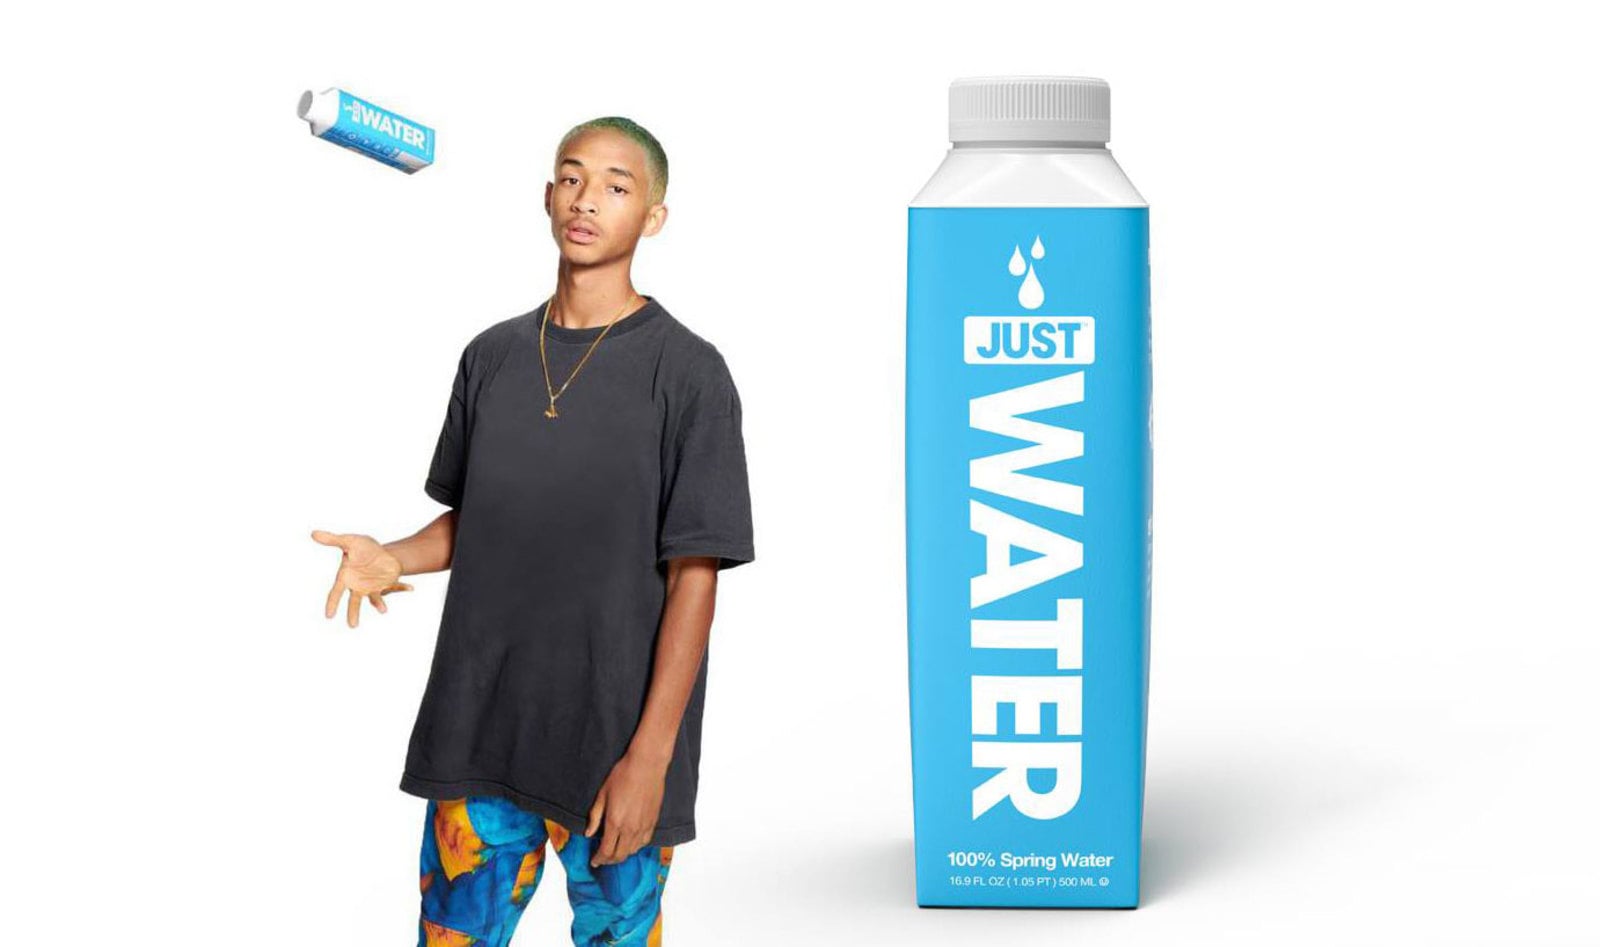 JUST WATER, Jaden Smith's Foundation Is Bringing Clean Water To Flint